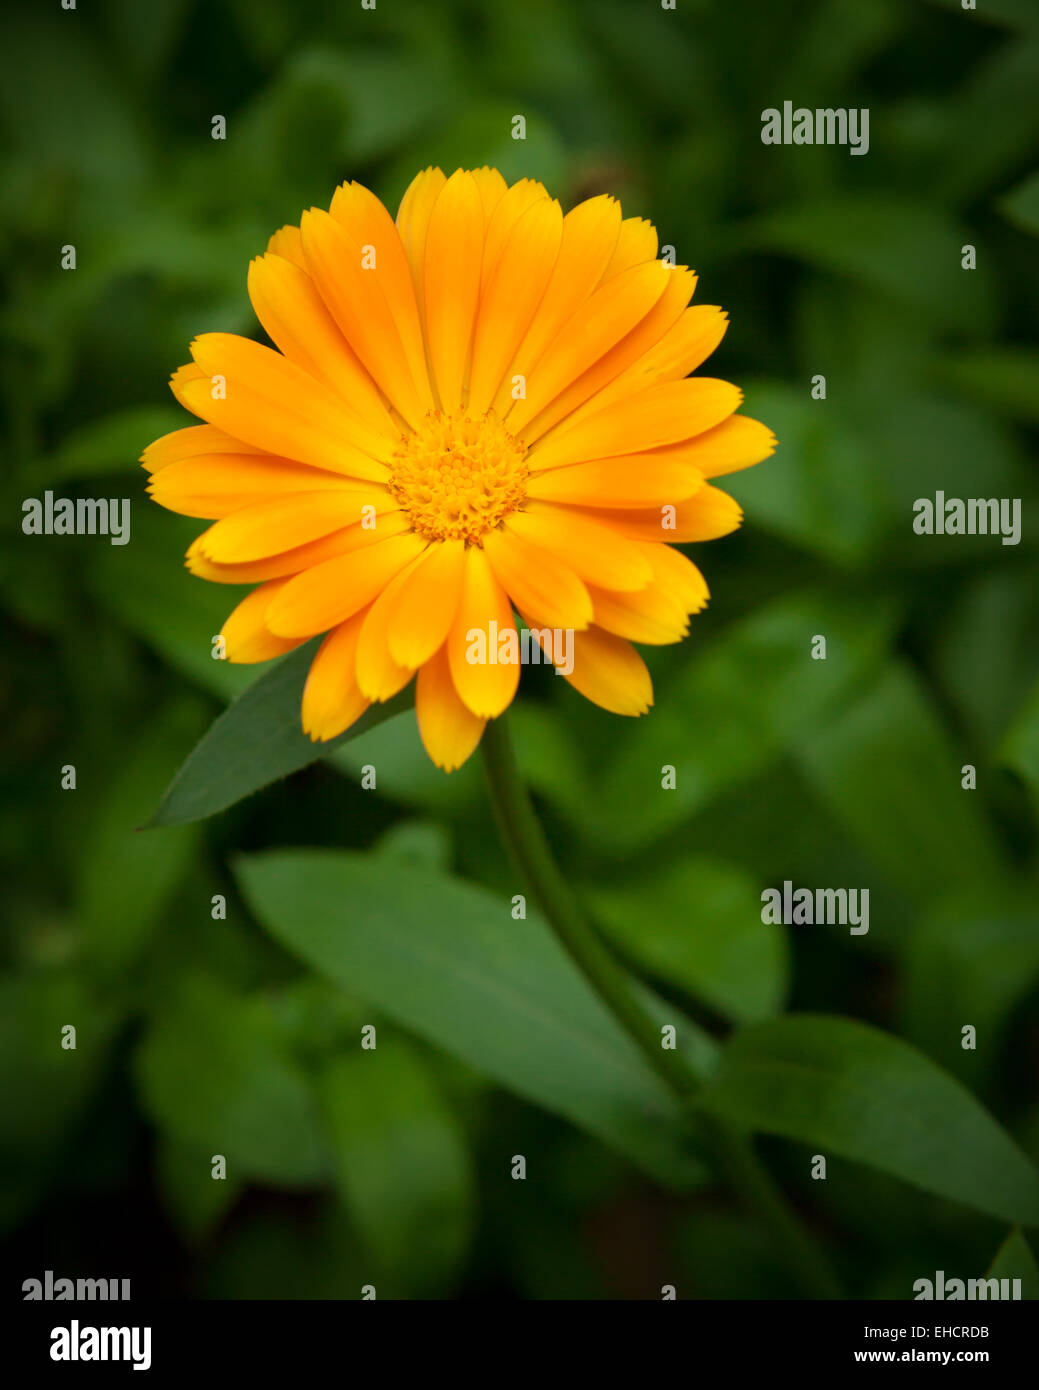 One yellow flower and green leaves Stock Photo